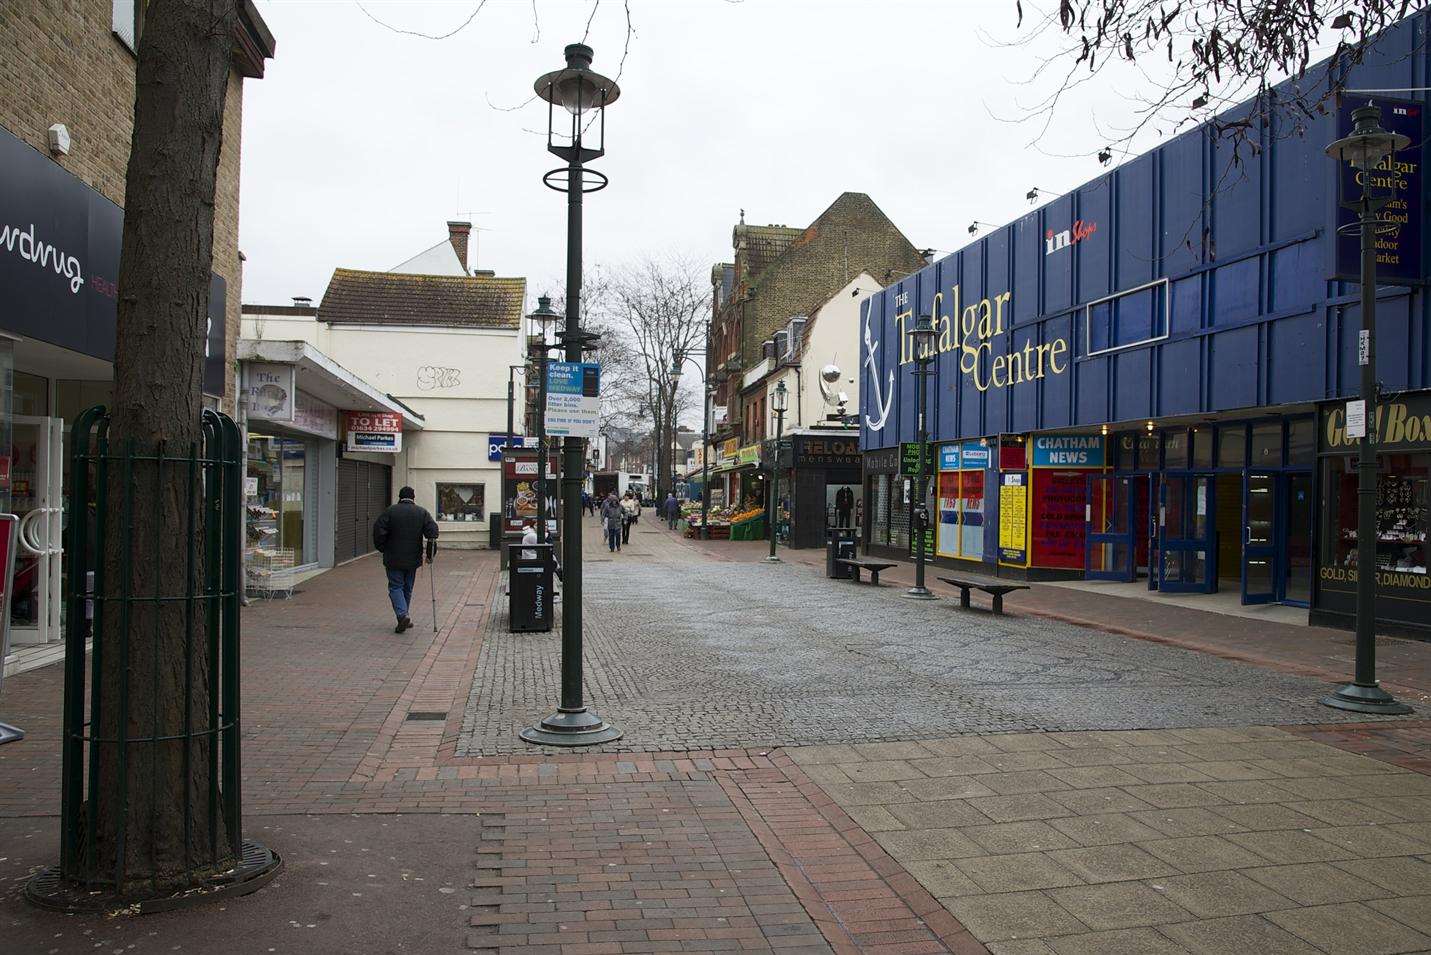 Chatham high street last year - to be the centre of Medway?